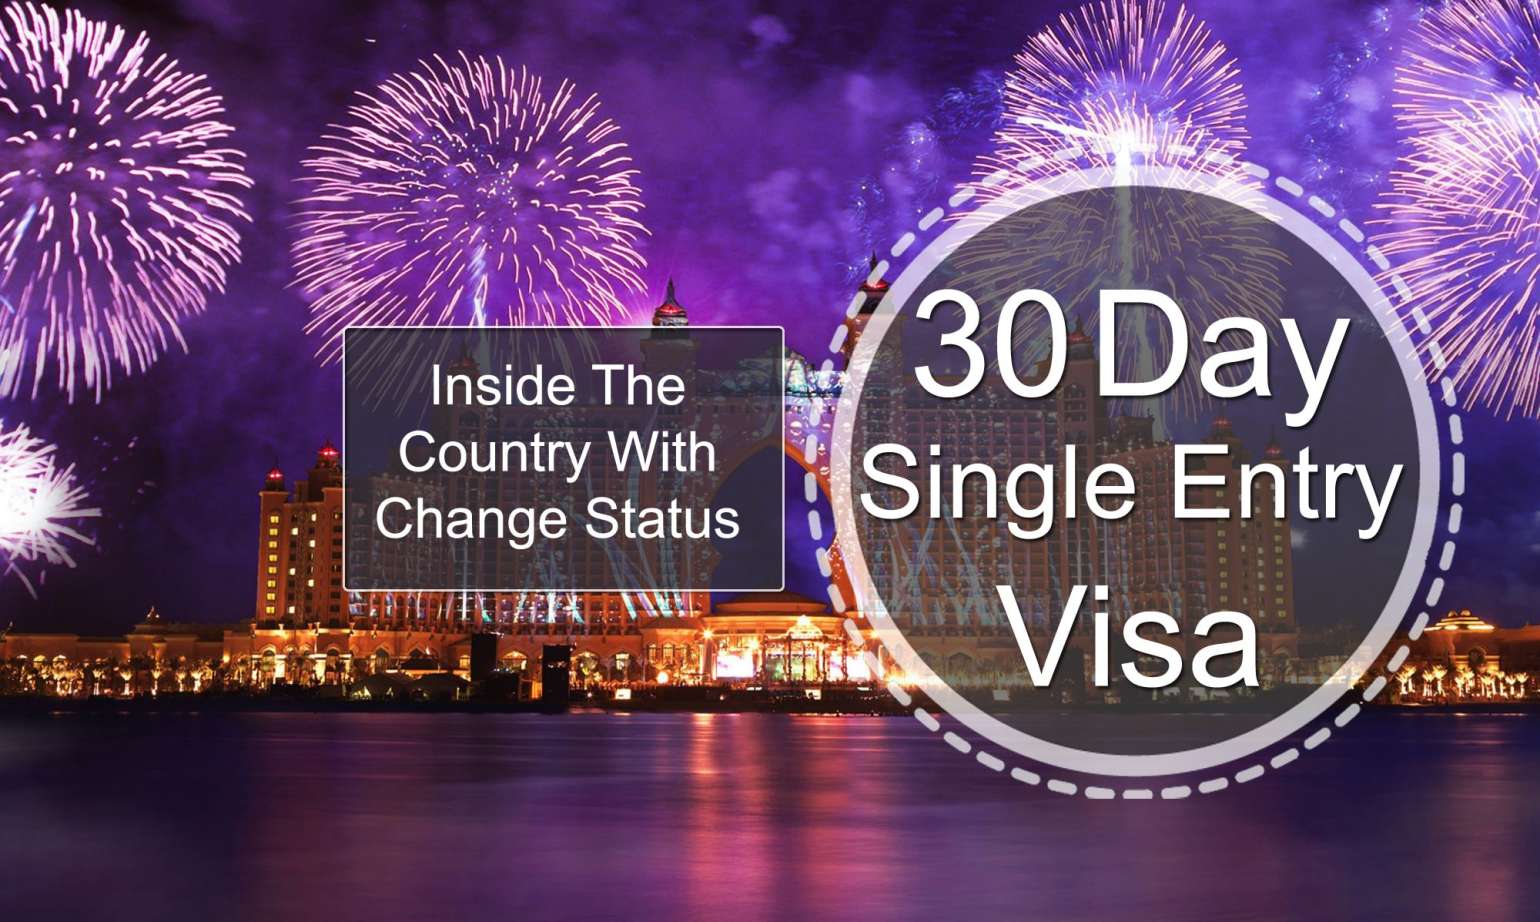 Inside the country with Change Status 30 Days Single Entry Visa